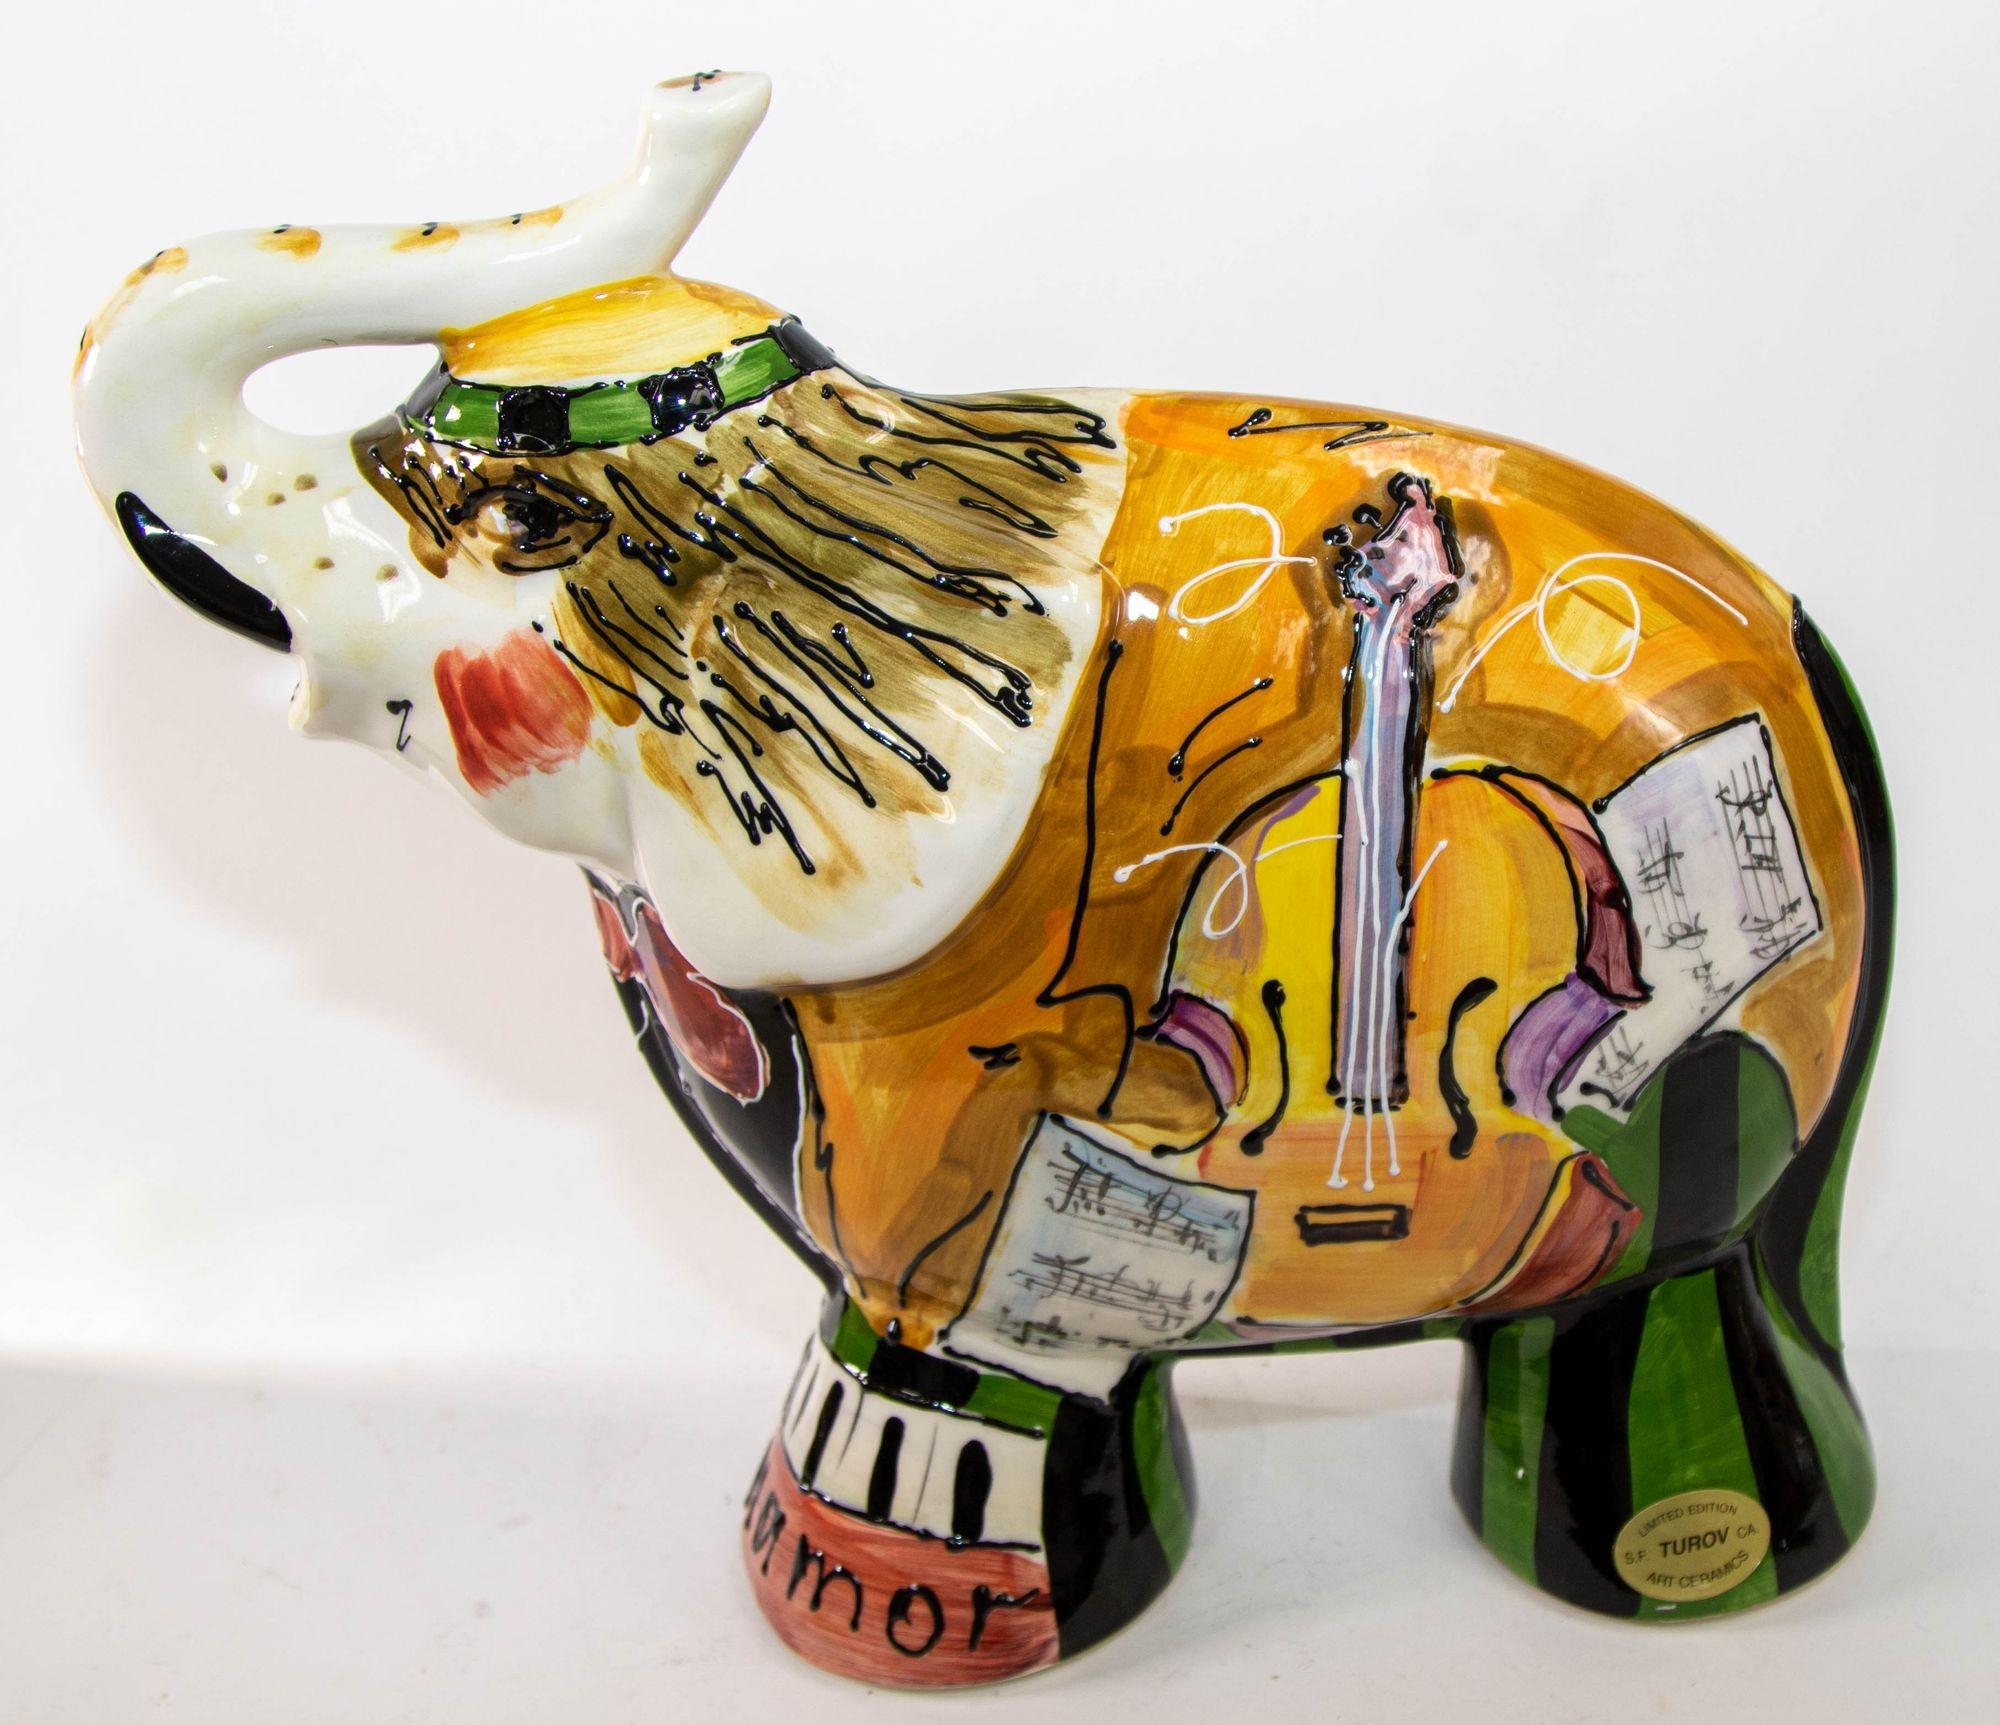 1990s Anatoly Turov Large Ceramic Circus Elephant Signed and Numbered For Sale 4